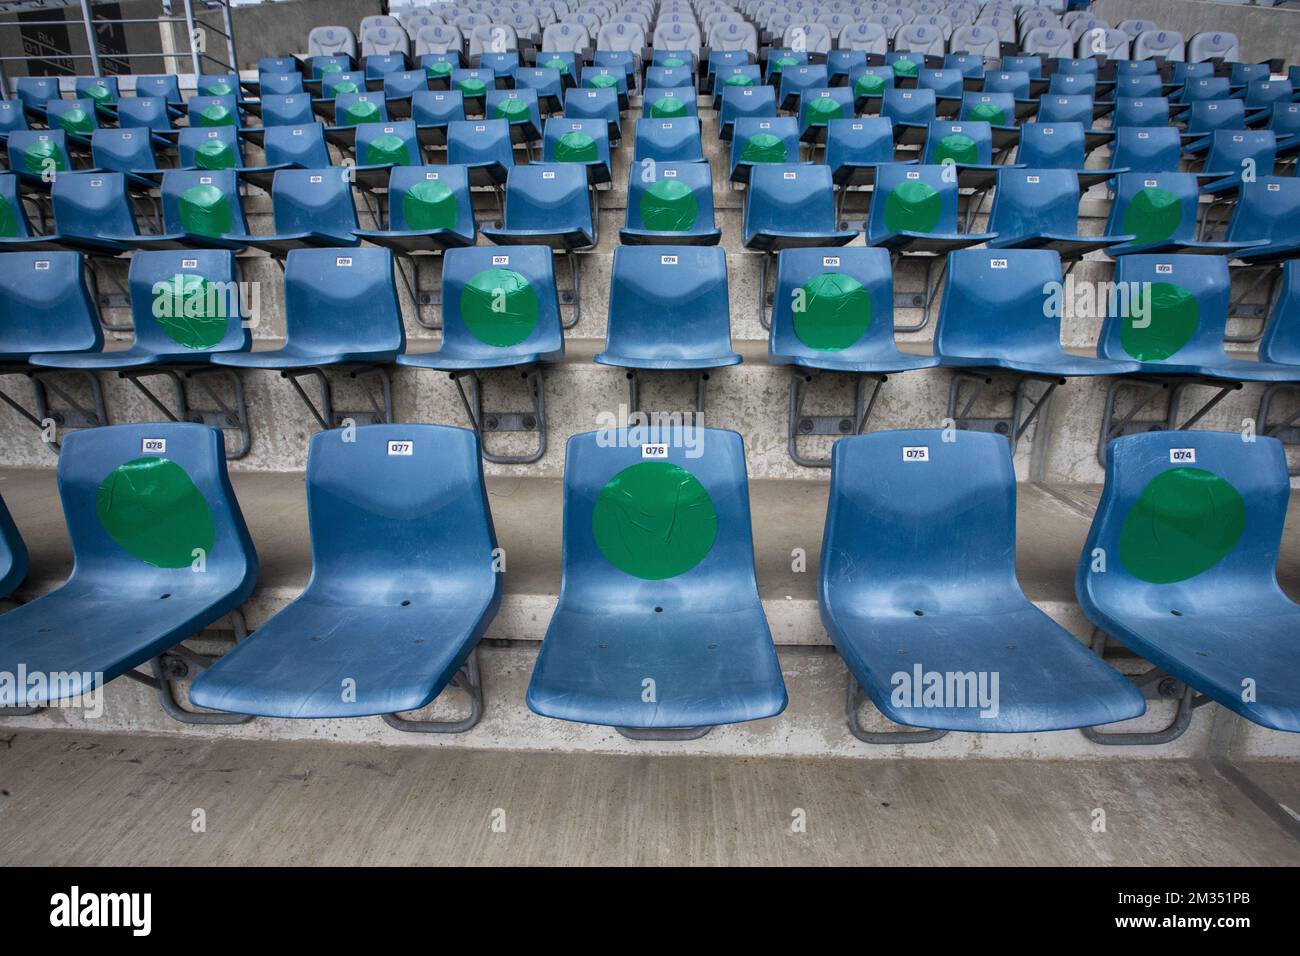 Illustration picture shows indications which seats should be left empty at a test event for 300 volunteer workers, with a performance by Compact Disk Dummies, organized by the city of Ghent, UZ Gent and The Arena Group at the Ghelamco Arena, in Ghent, Saturday 15 May 2021. The participants arrive in blocks of time so that it never gets too busy. They undergo a rapid test and must also share their contact information. They are given a fixed and numbered seat, must keep their mouth mask on and keep their distance. During this event, it will be examined how rapid tests can be used in a smooth and Stock Photo